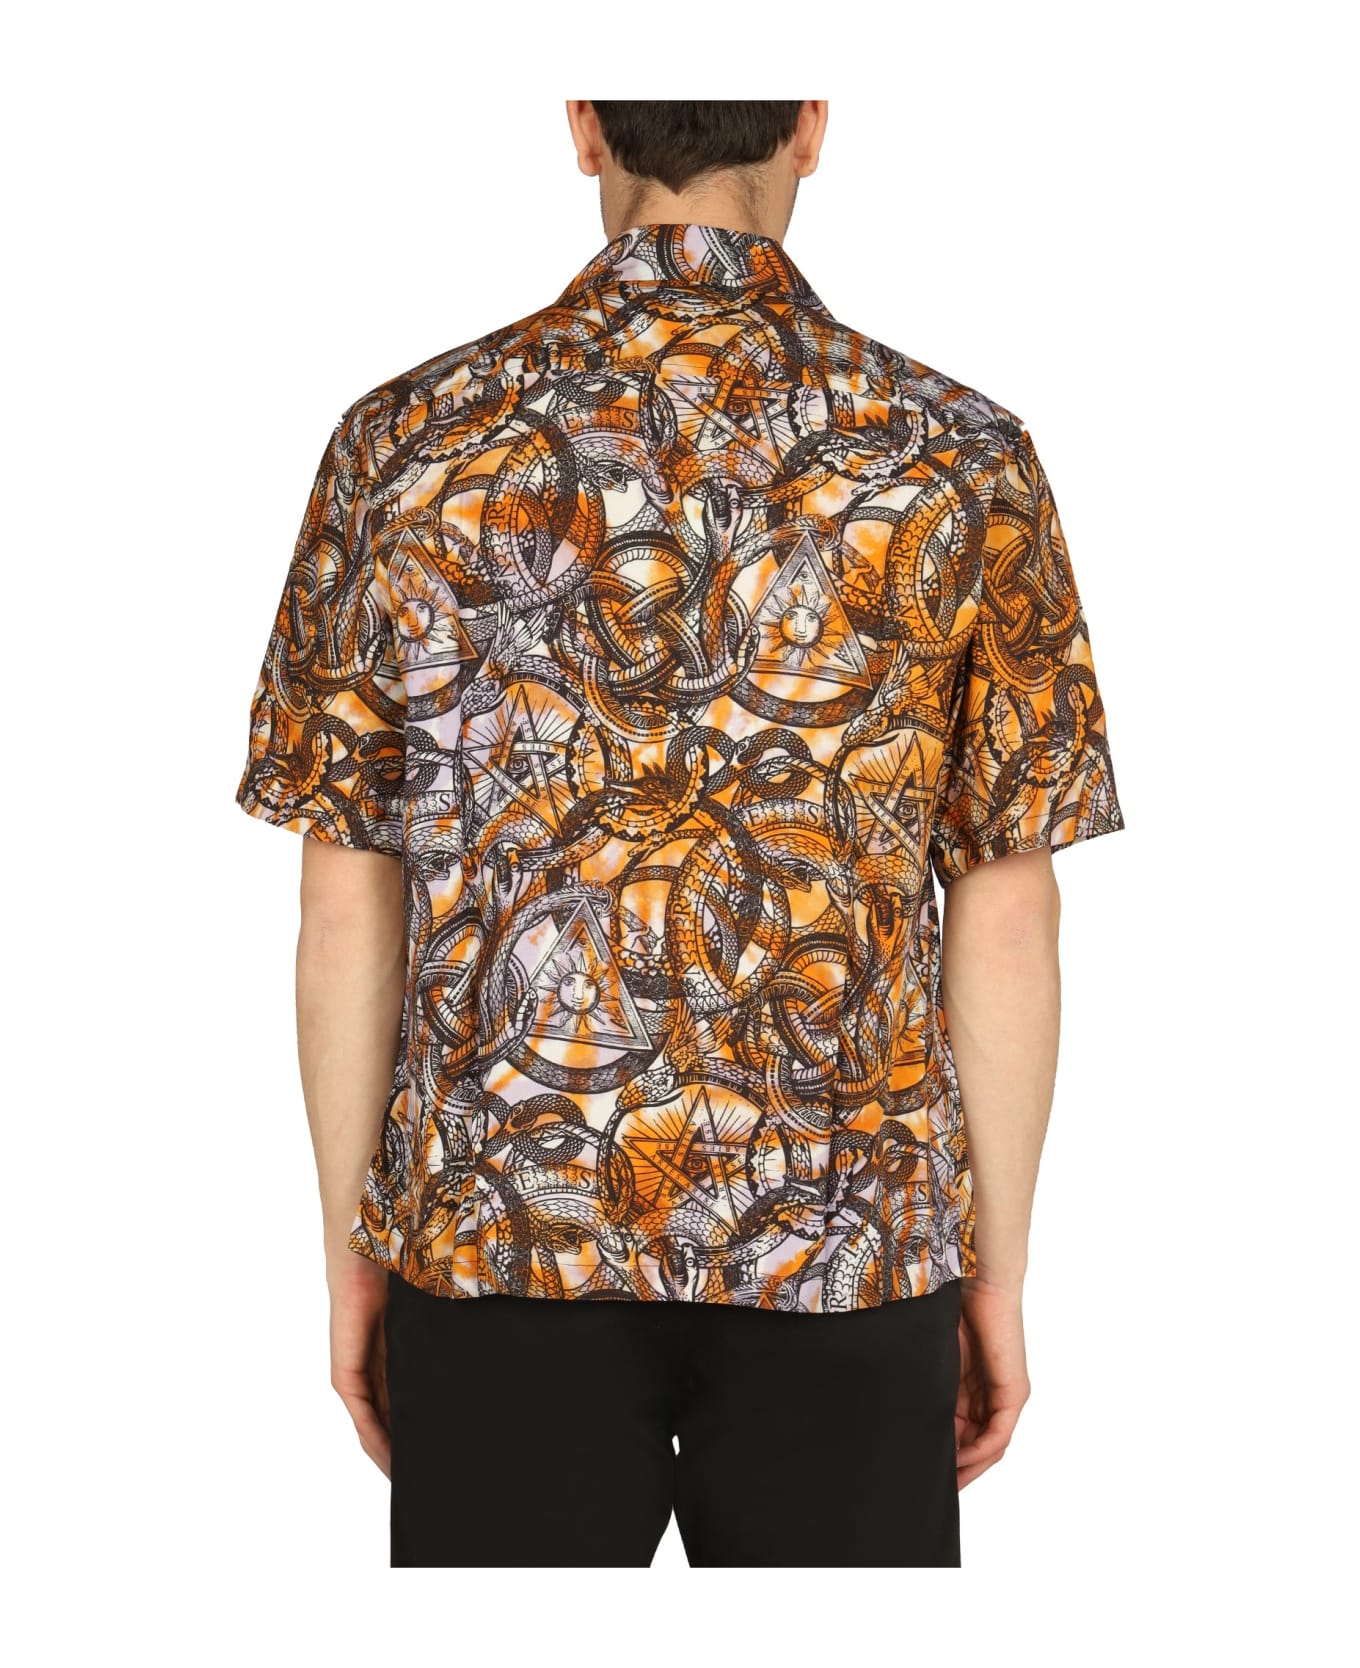 Aries All Over Print Shirt - MULTICOLOR